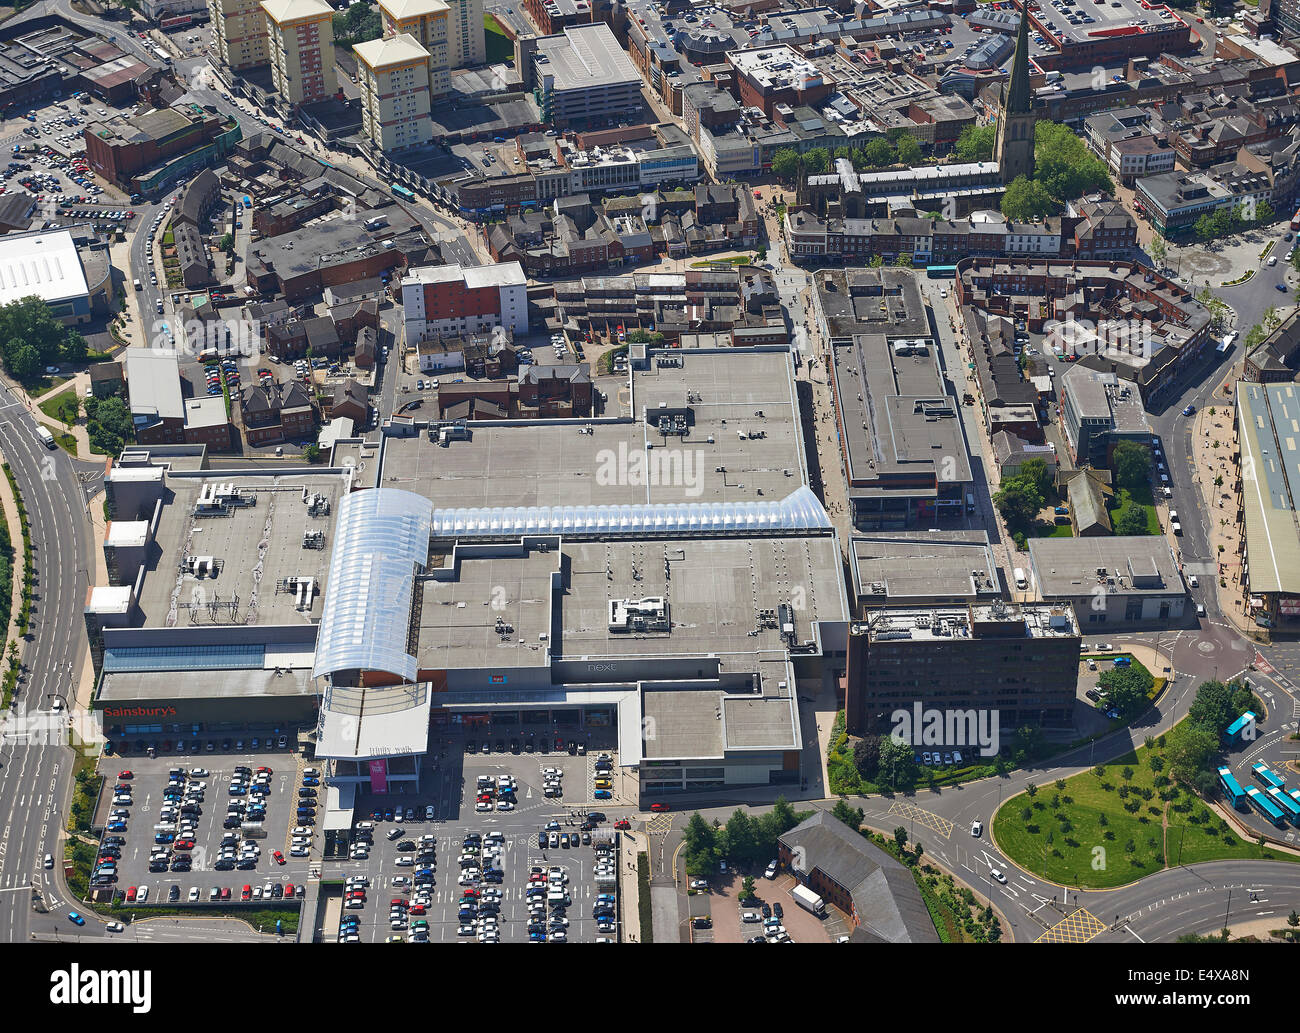 Wakefield town centre from the air, with the new Trinity Shopping